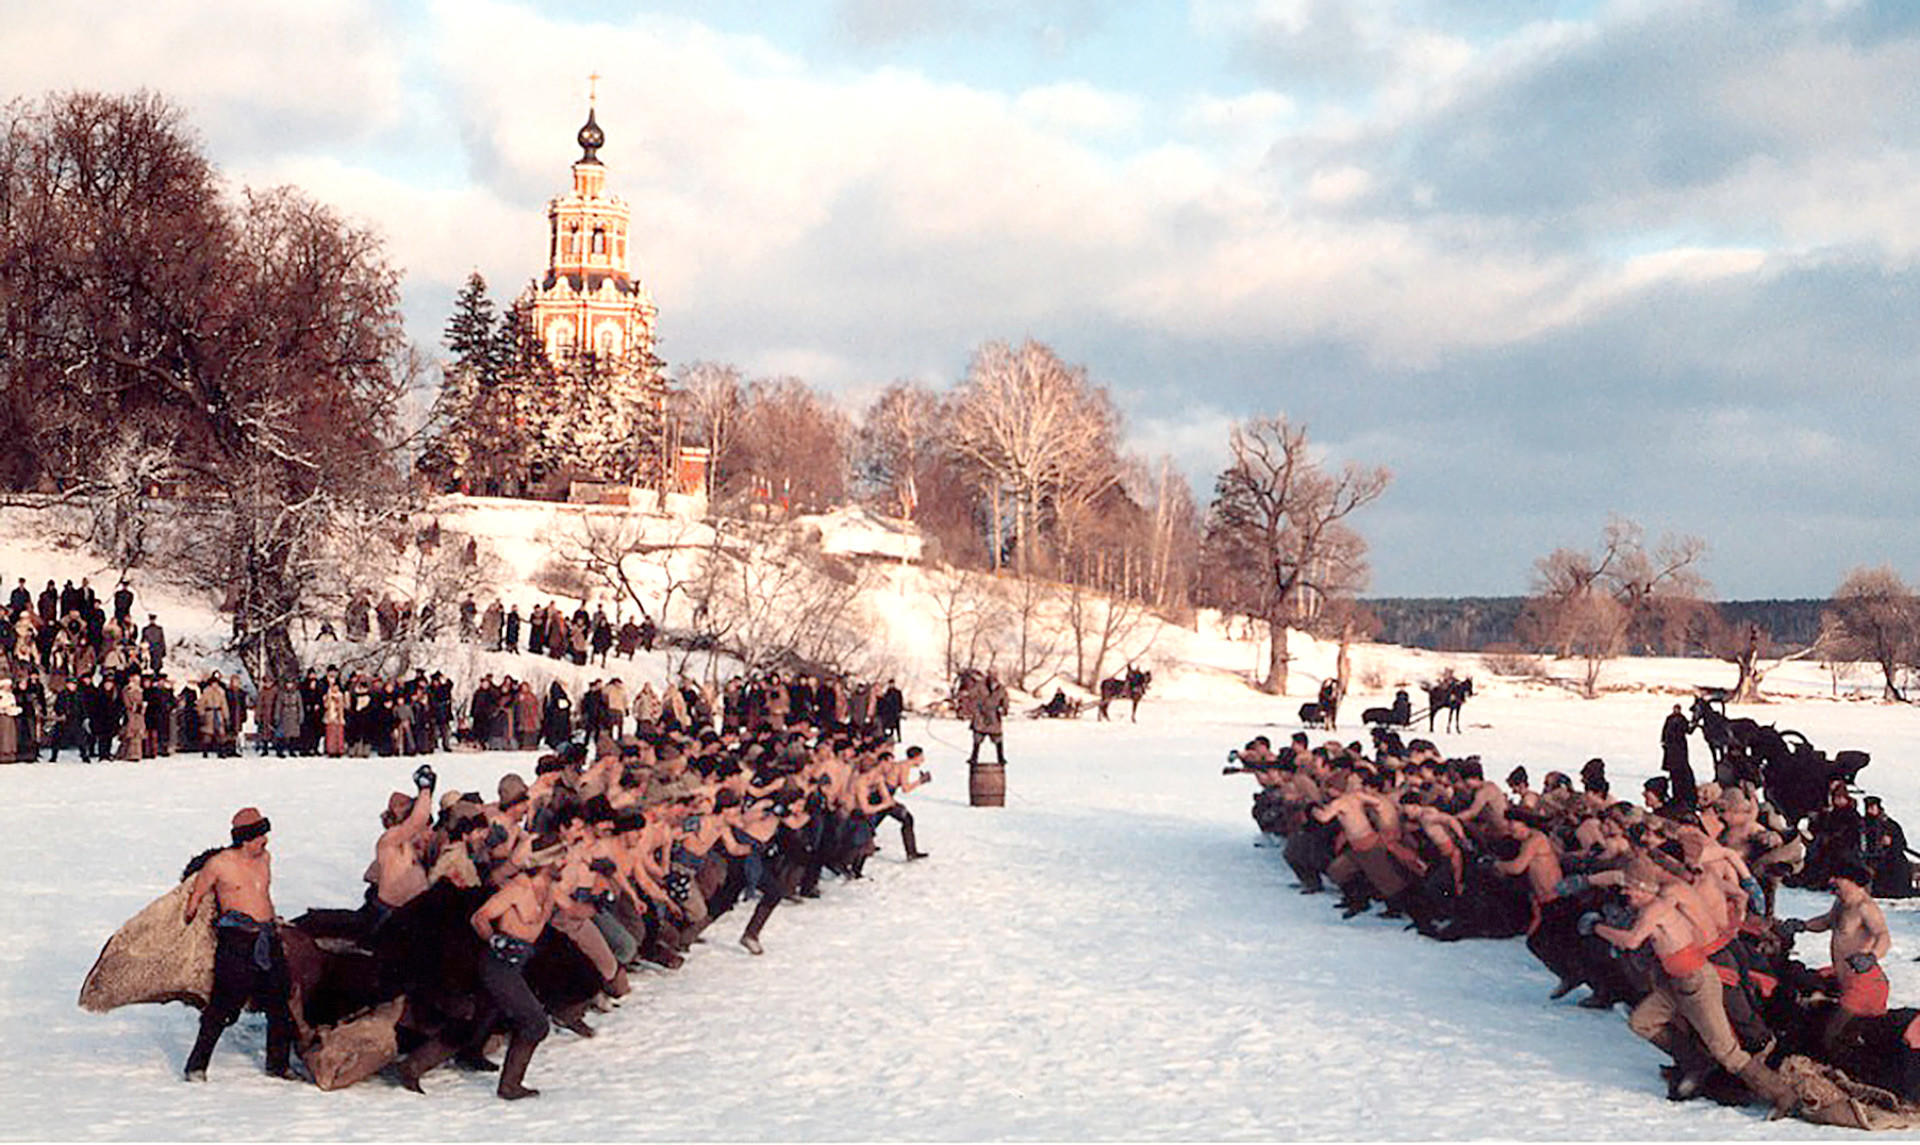 Russian fist fight as shown in the movie 